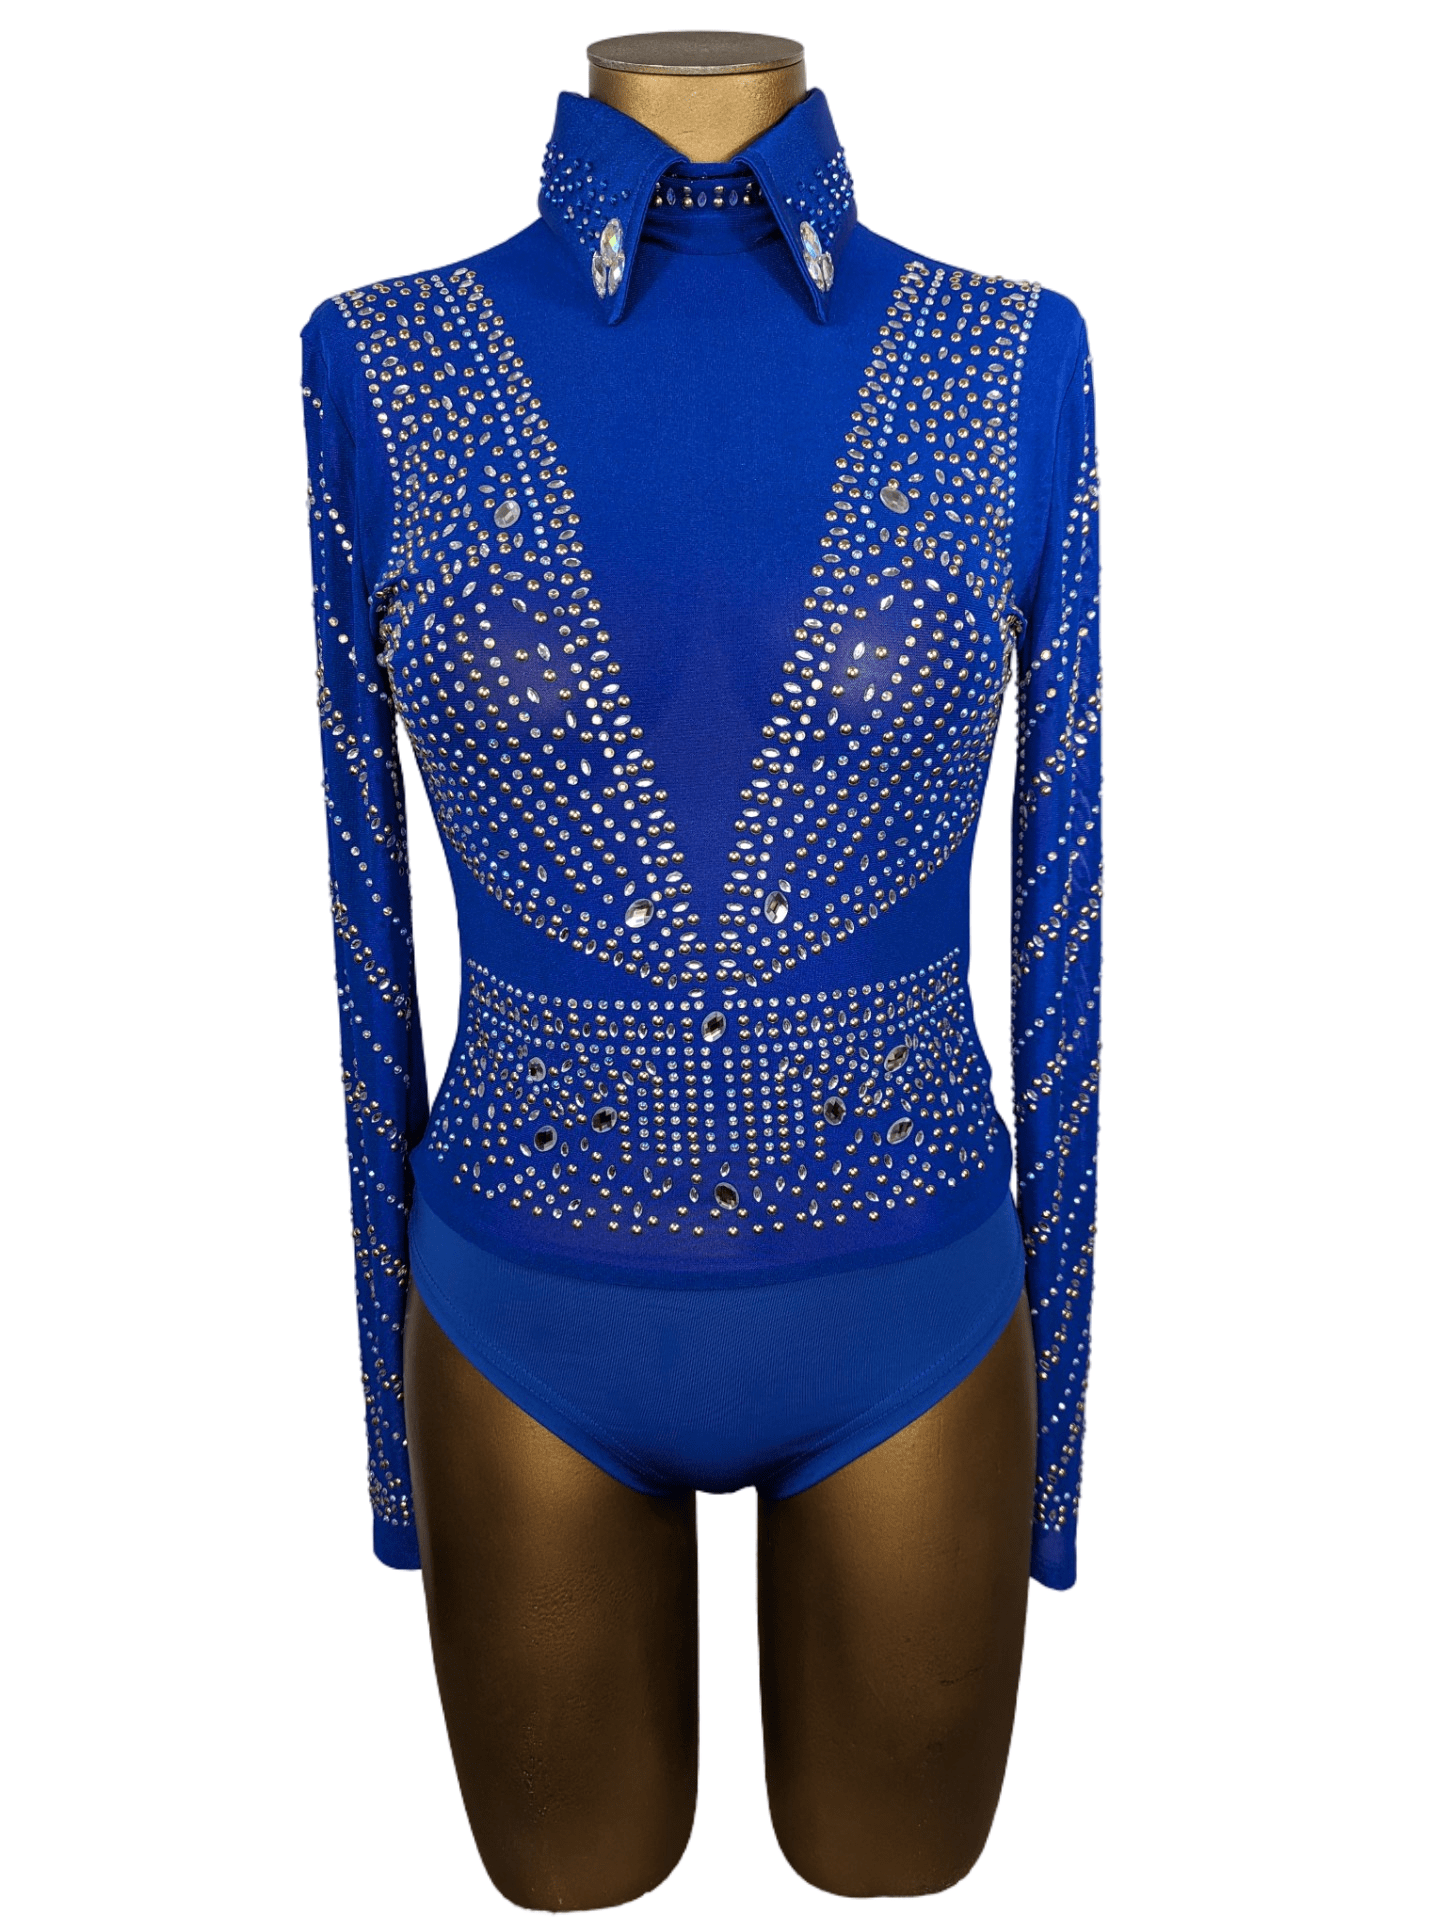 sparkle-ridge-womens-western-wear-affordable-show-clothes-horse-shirts-with-bling-rodeo-bodysuit-royal-blue-deep-v-studdess-front.png (Copy)